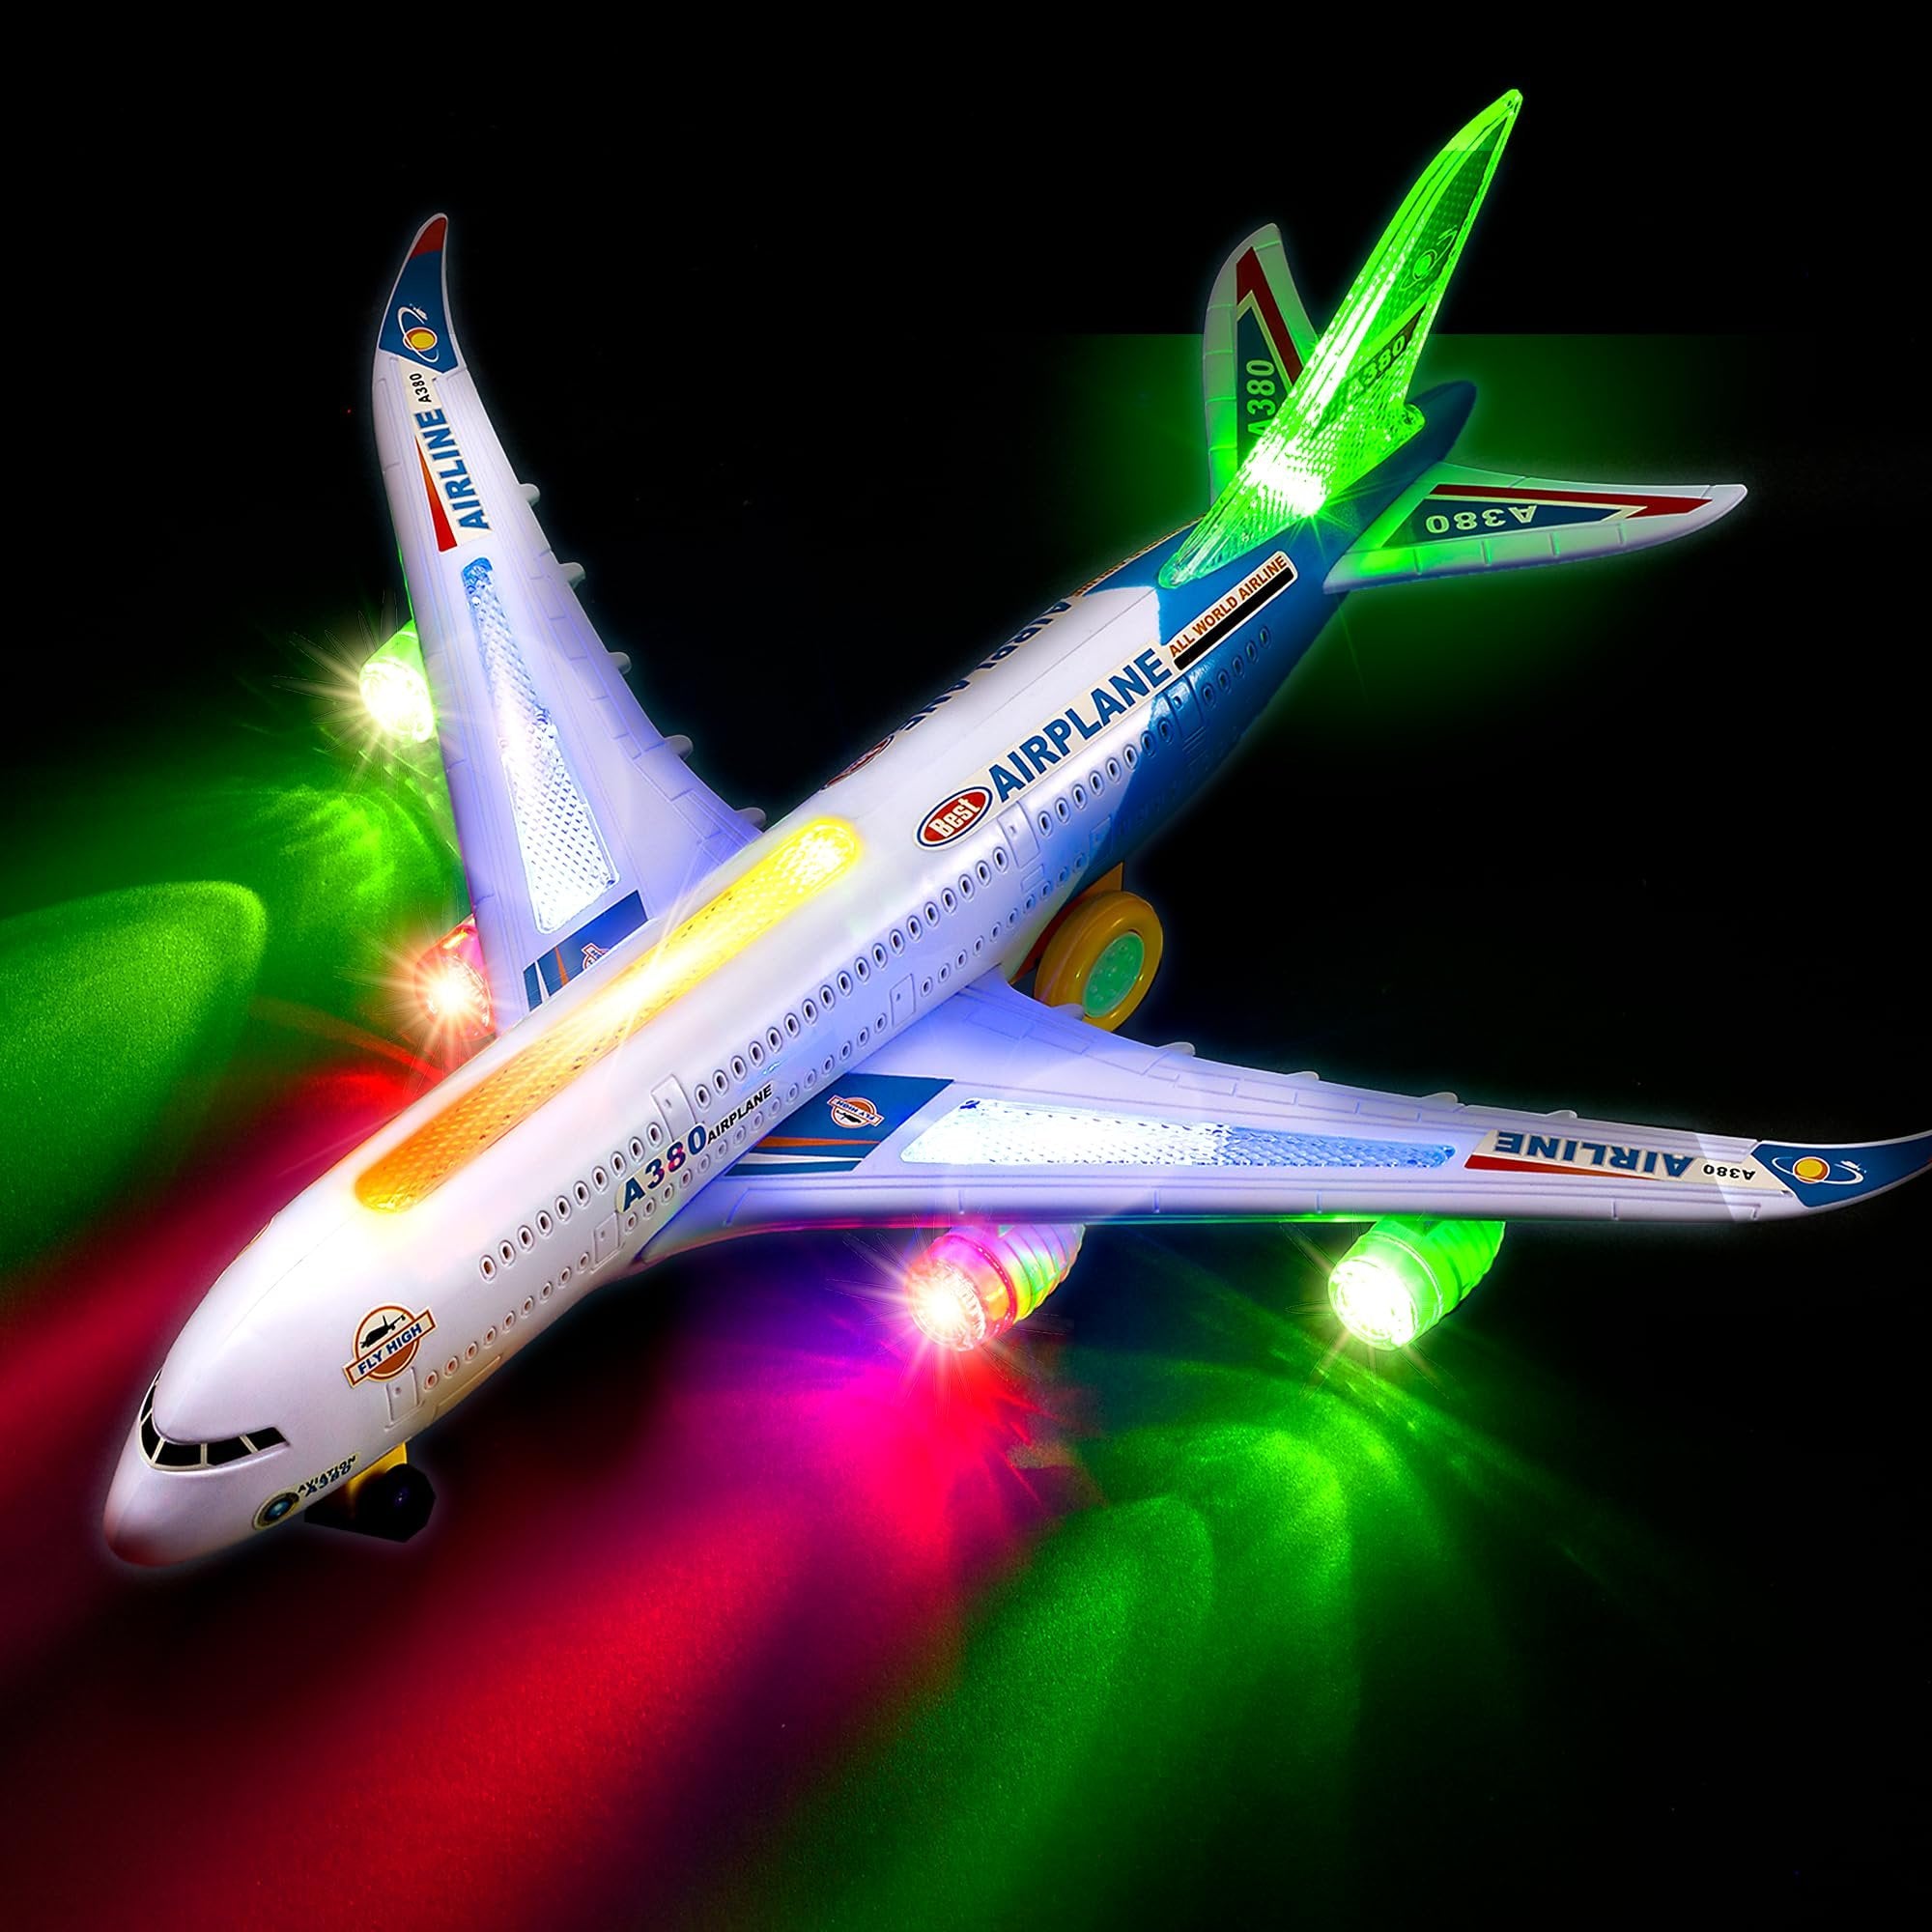 Zetz Brands Bump and Go Airplane Toy - Toy Airplane with 4D Lights - Kids Airplane Toys with Reflecting Lights and Sound - Realistic Model Airplane for Boys and Girls 3-12 Years Old